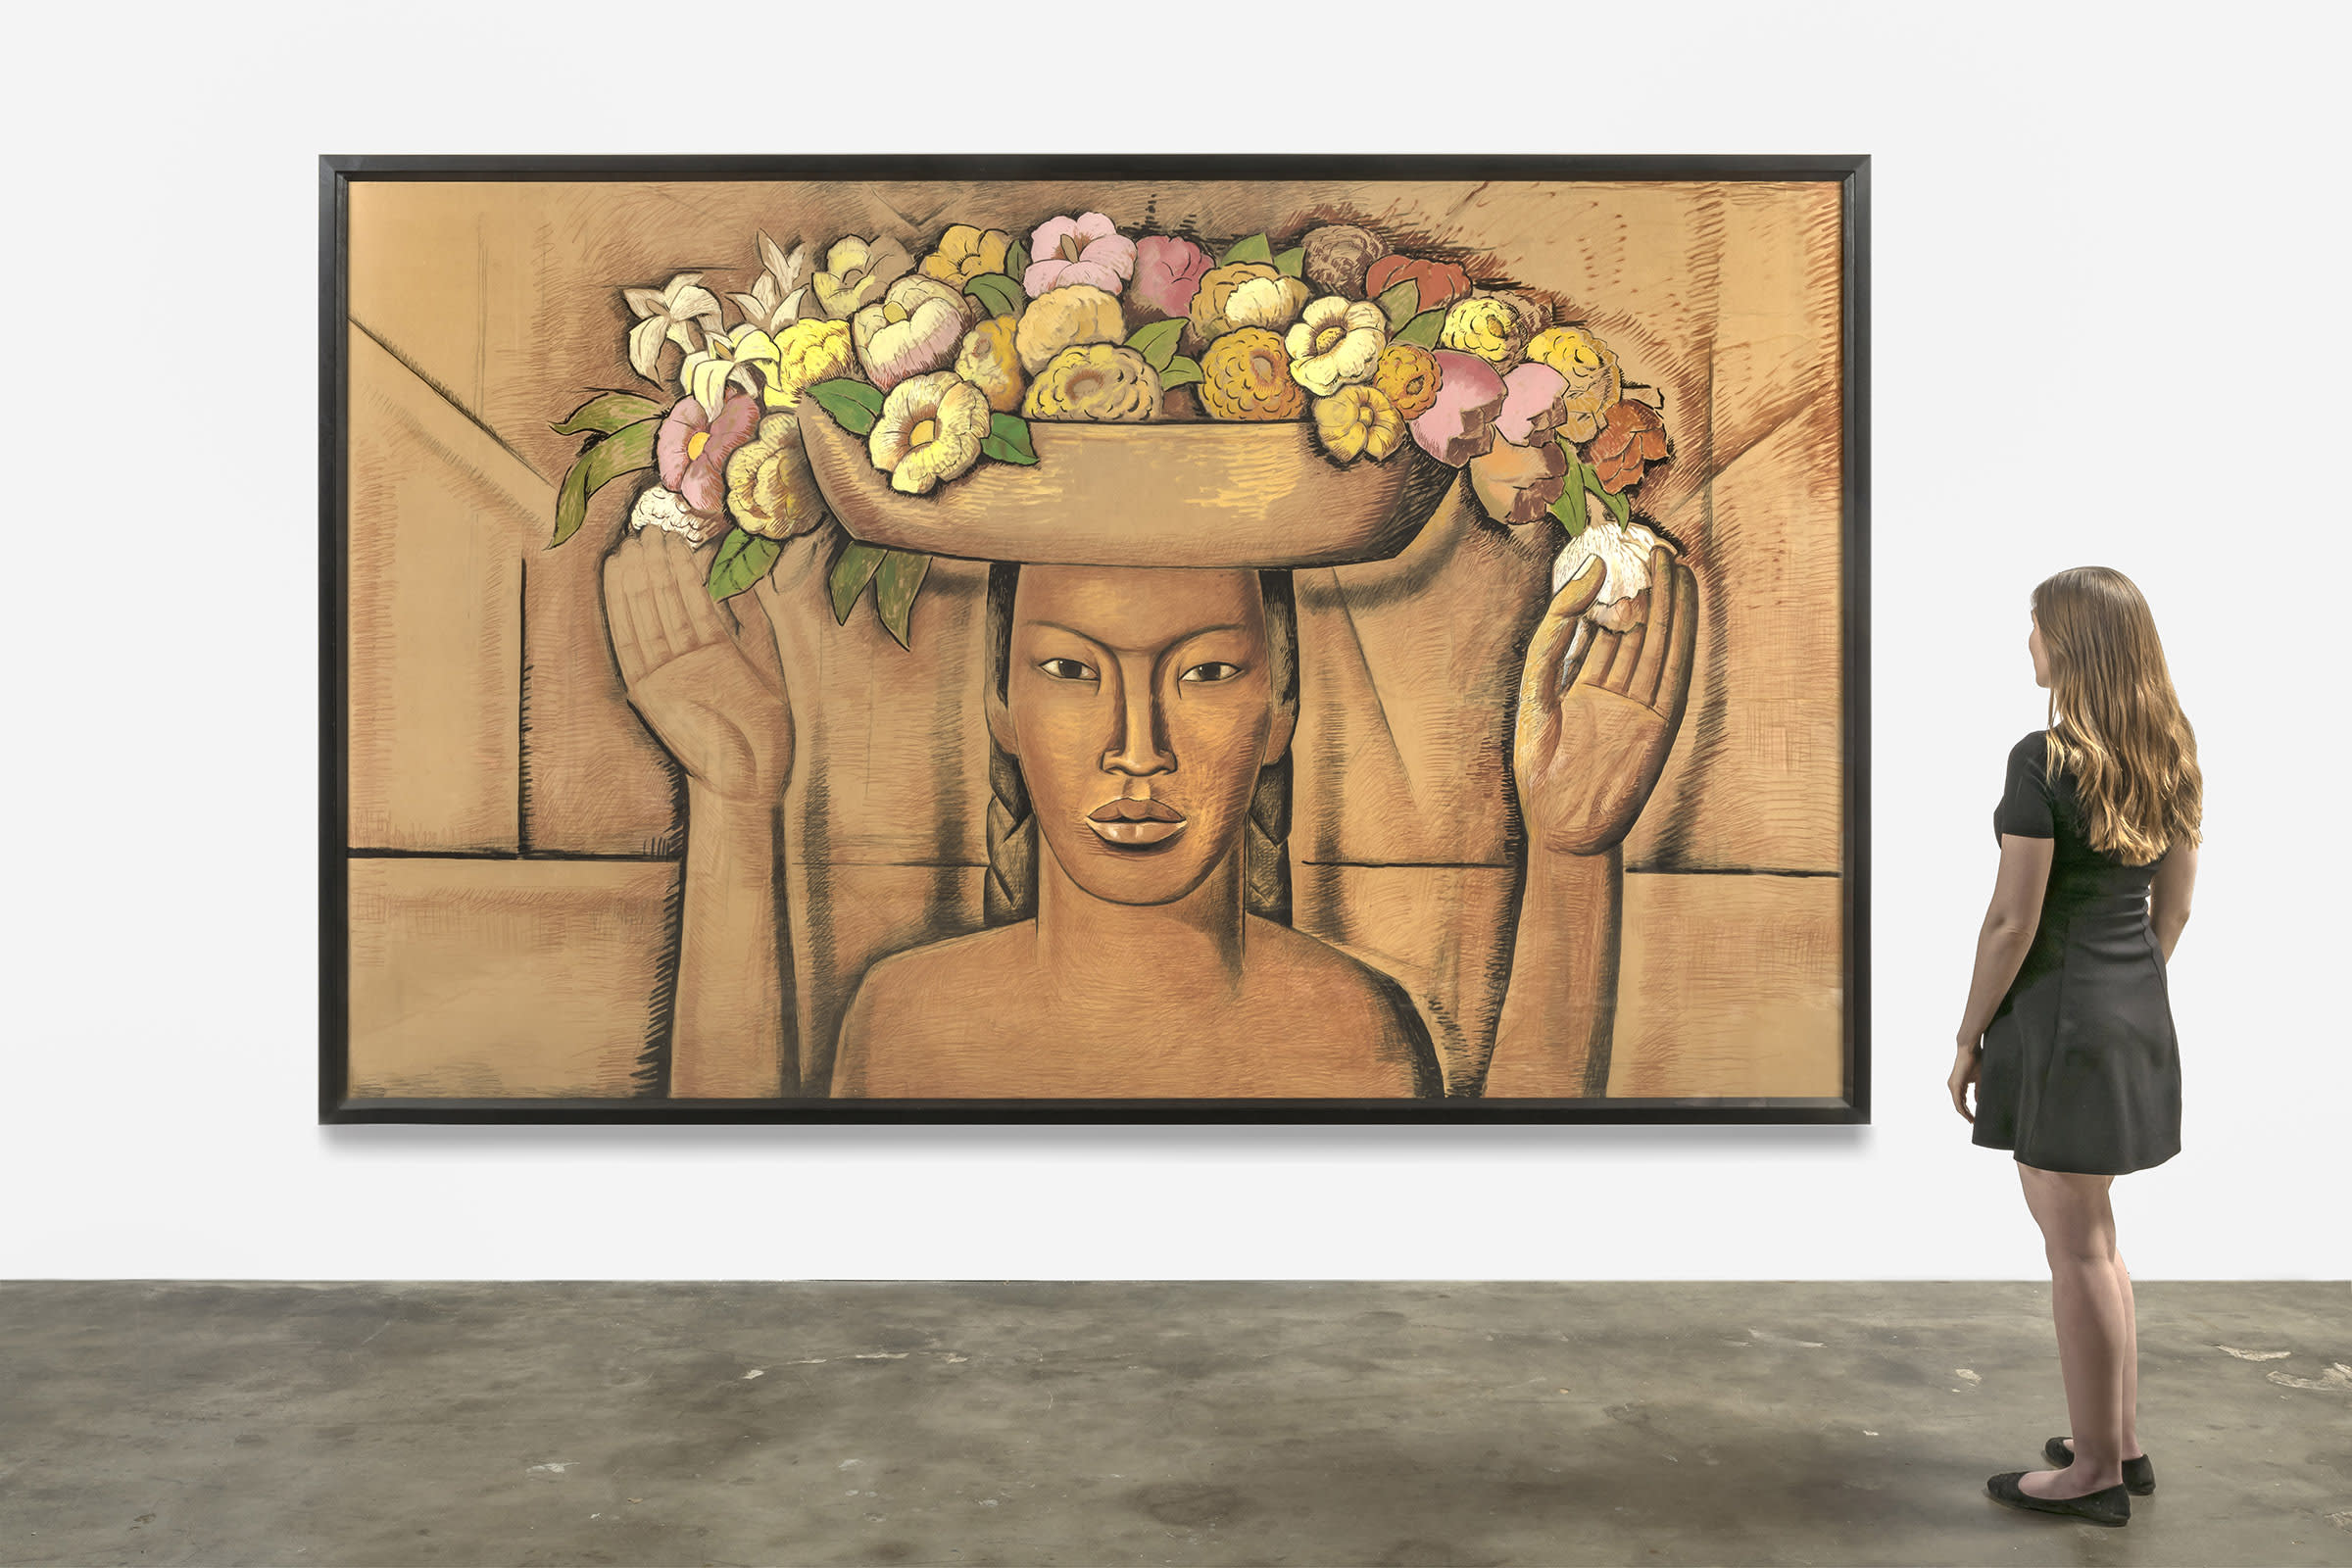 Alfredo Ramos Martínez, study for Vendedoras de Flores, a mural at Scripps College, ca. 1945. Courtesy of Louis Stern Fine Art, Los Angeles.